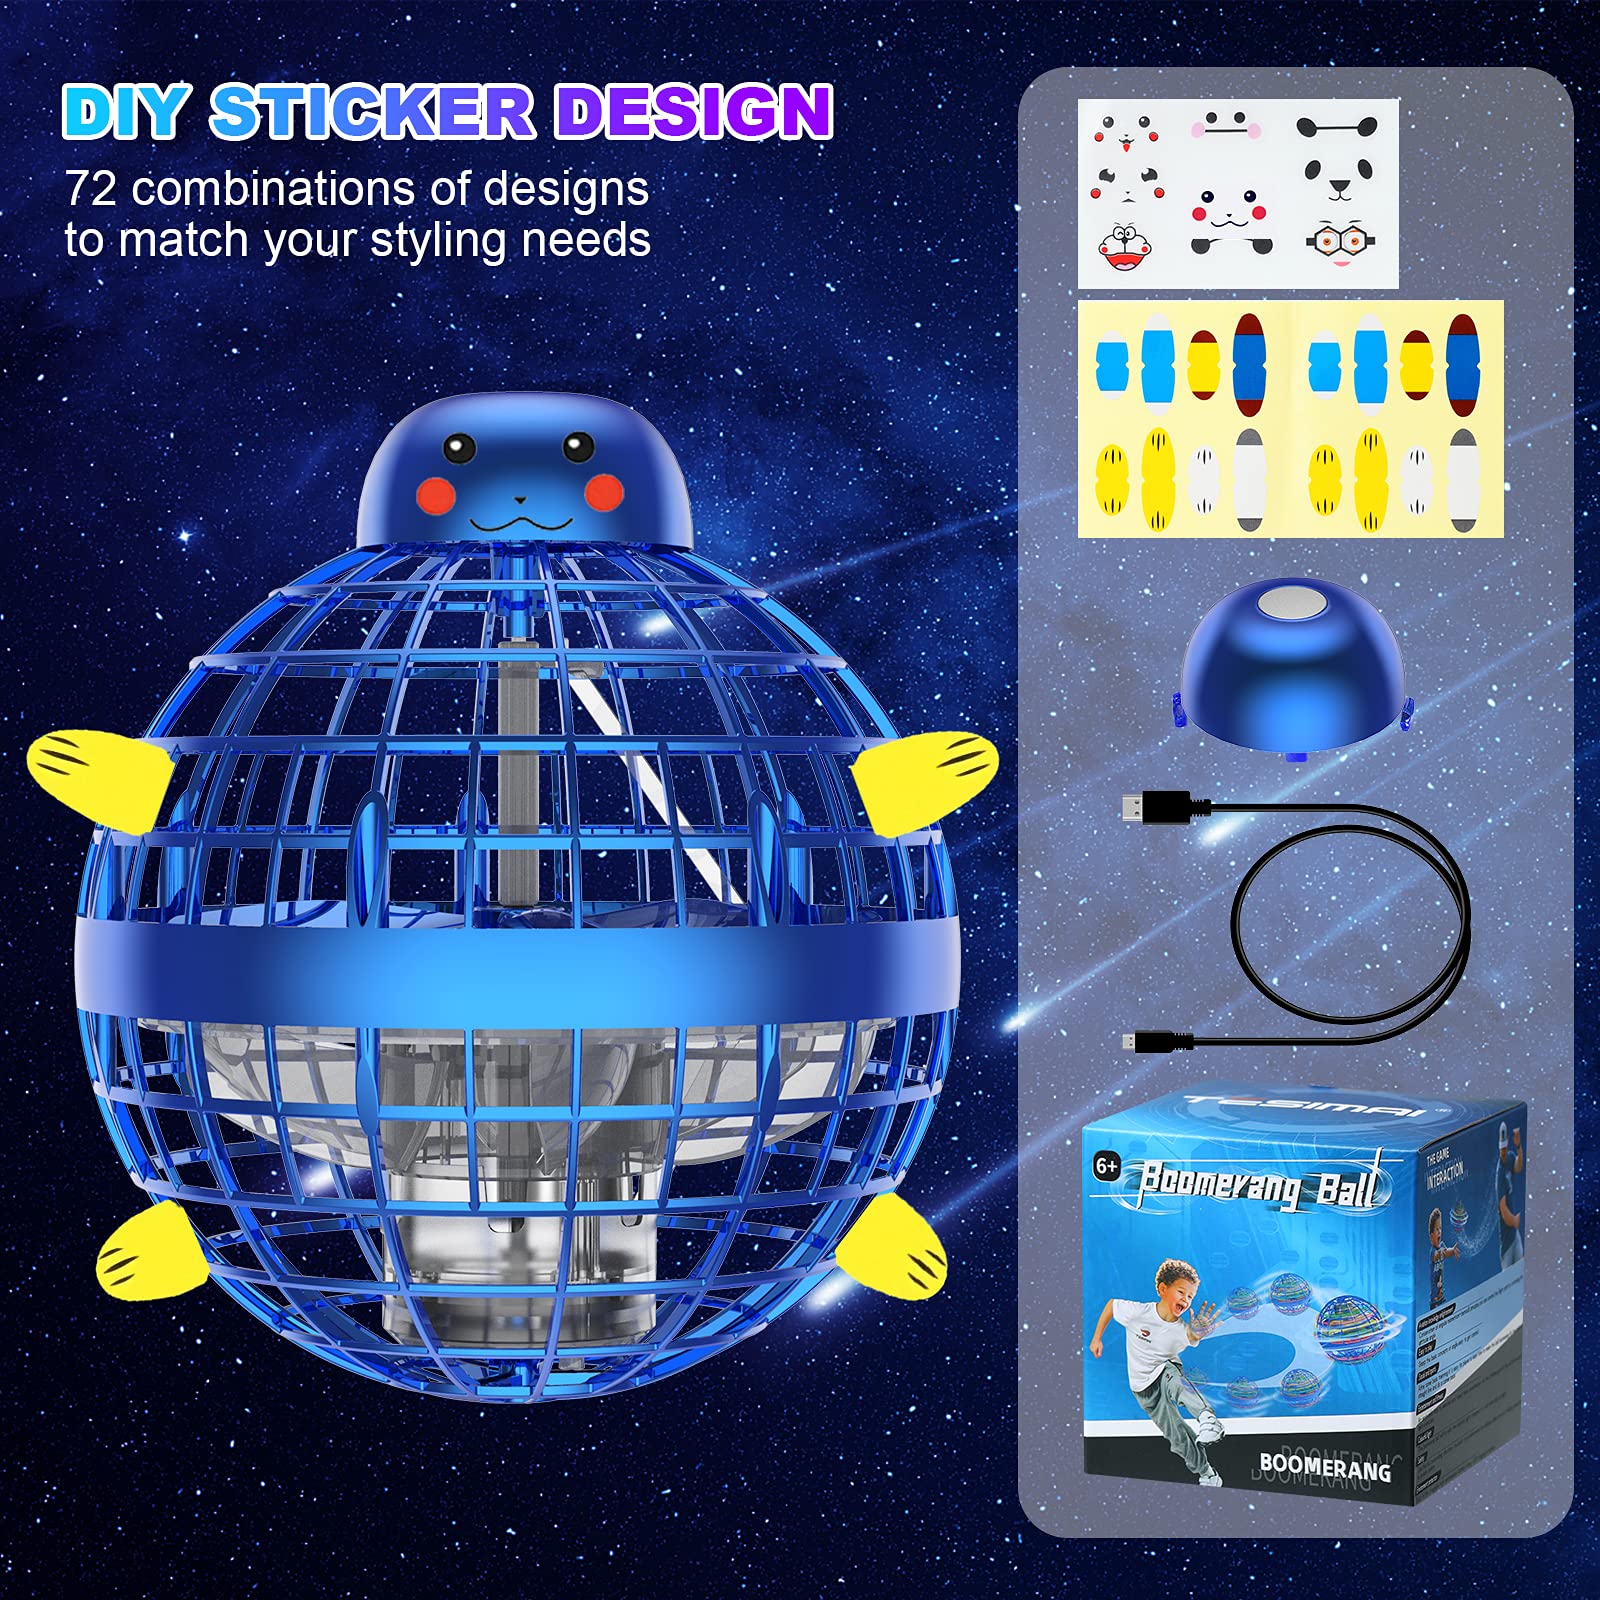 Joysky Flying Orb - Flying Ball Toy DIY Flying Space Orb RGB Light Flying Toys 360°Rotating Hover Ball Cool Toy Soaring Orb Drones for Kids Adult, 2021 Upgraded Flyorb Blue